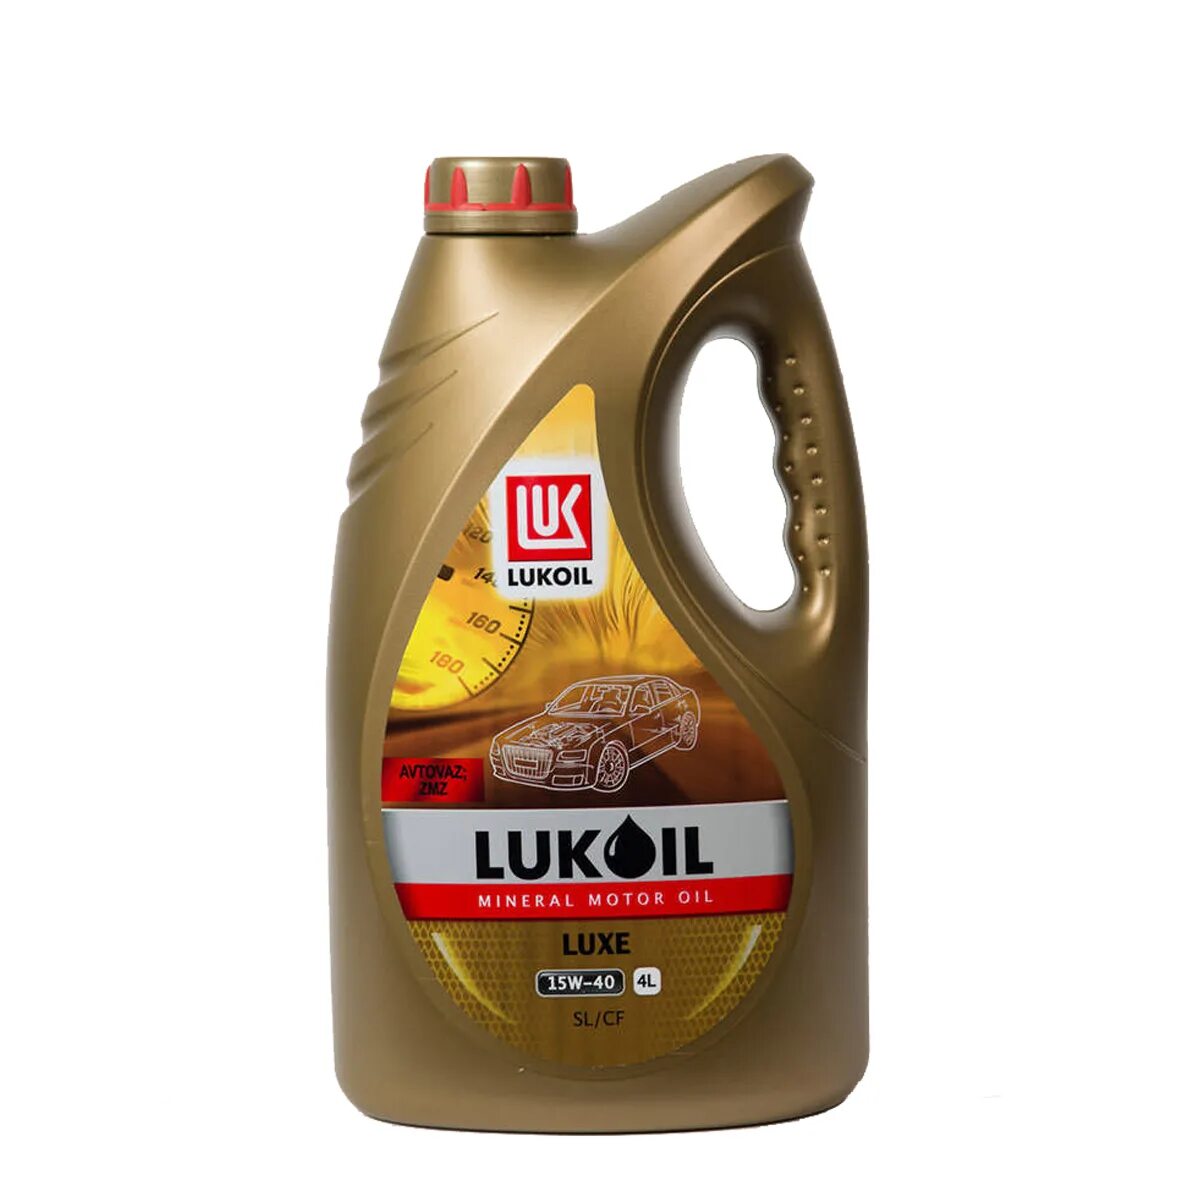 Api cj. Lukoil Luxe 15w-40. Лукойл Люкс 10w30. Lukoil. Sae15w40. Масло Luxe 15w40 минеральное.